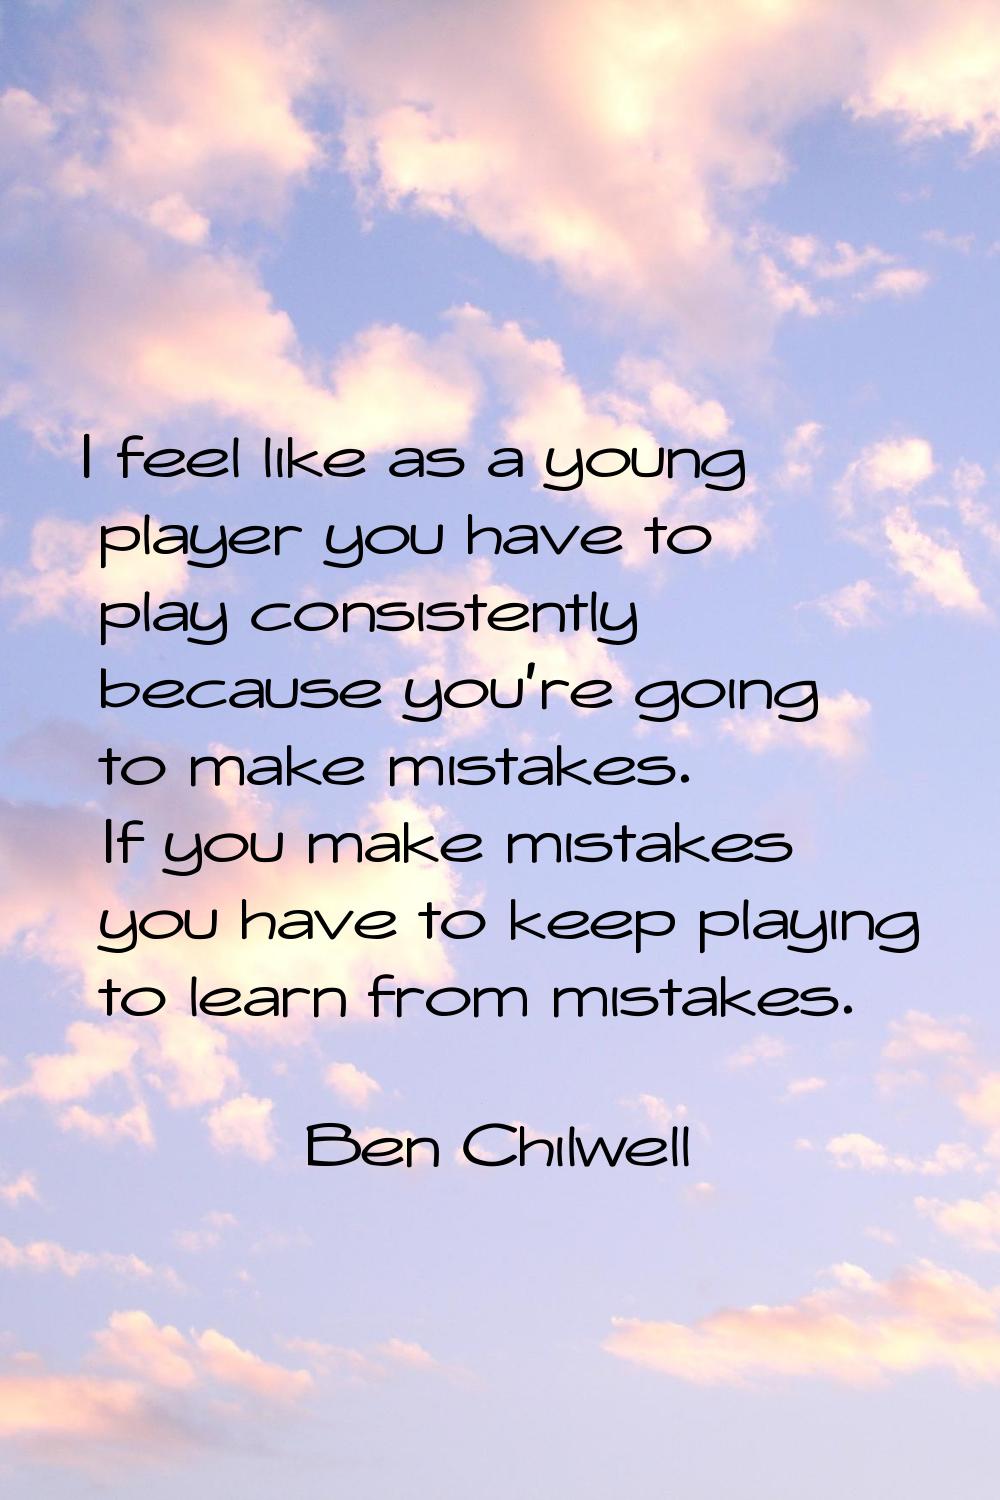 I feel like as a young player you have to play consistently because you're going to make mistakes. 